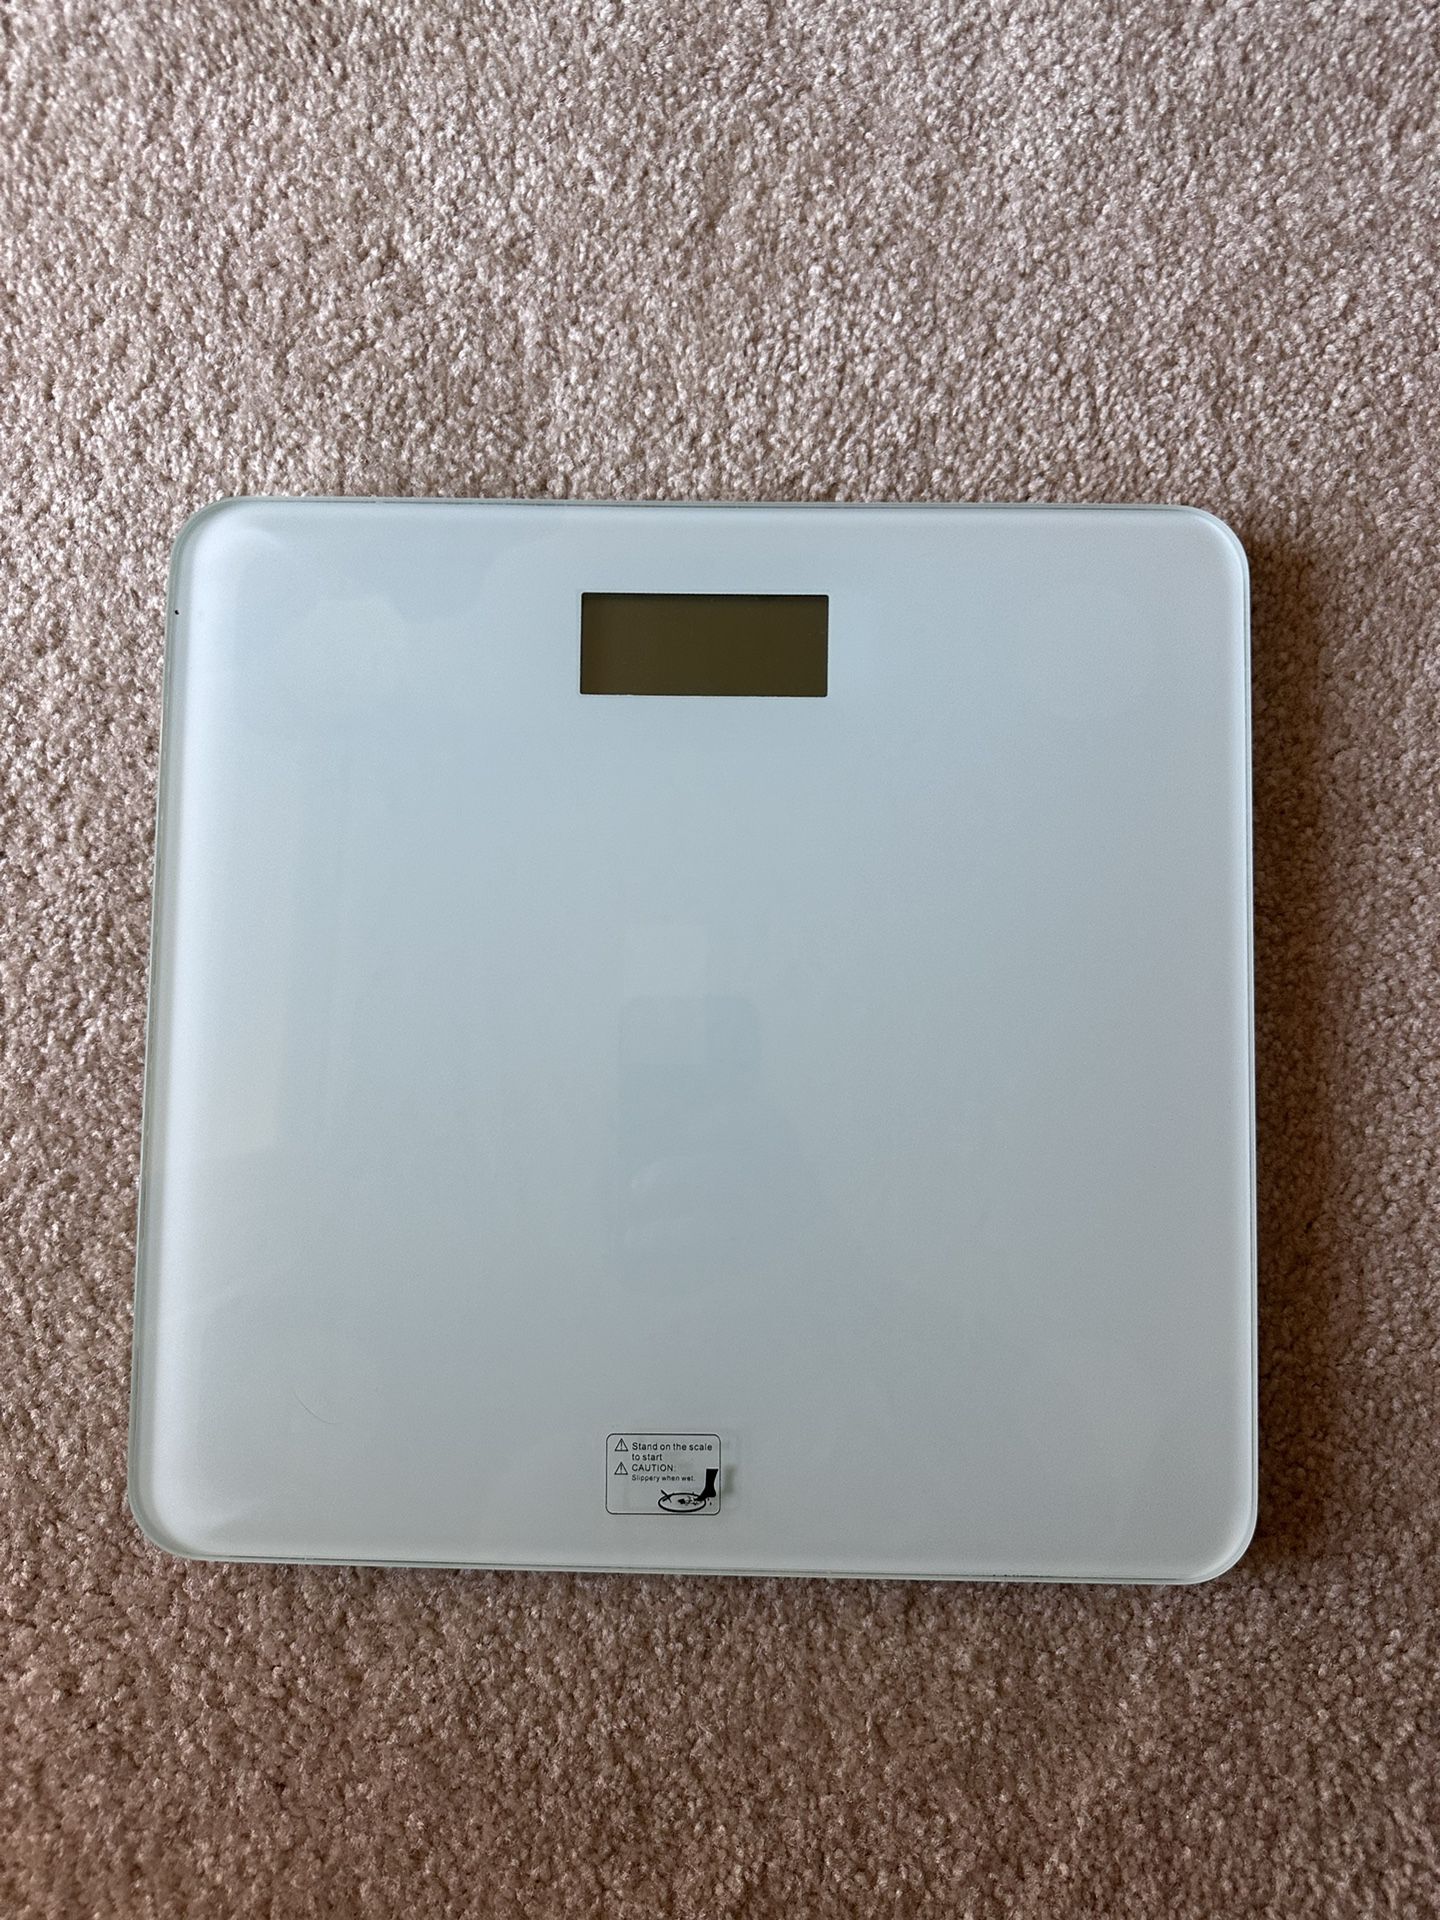 Digital Body Weight Scale New